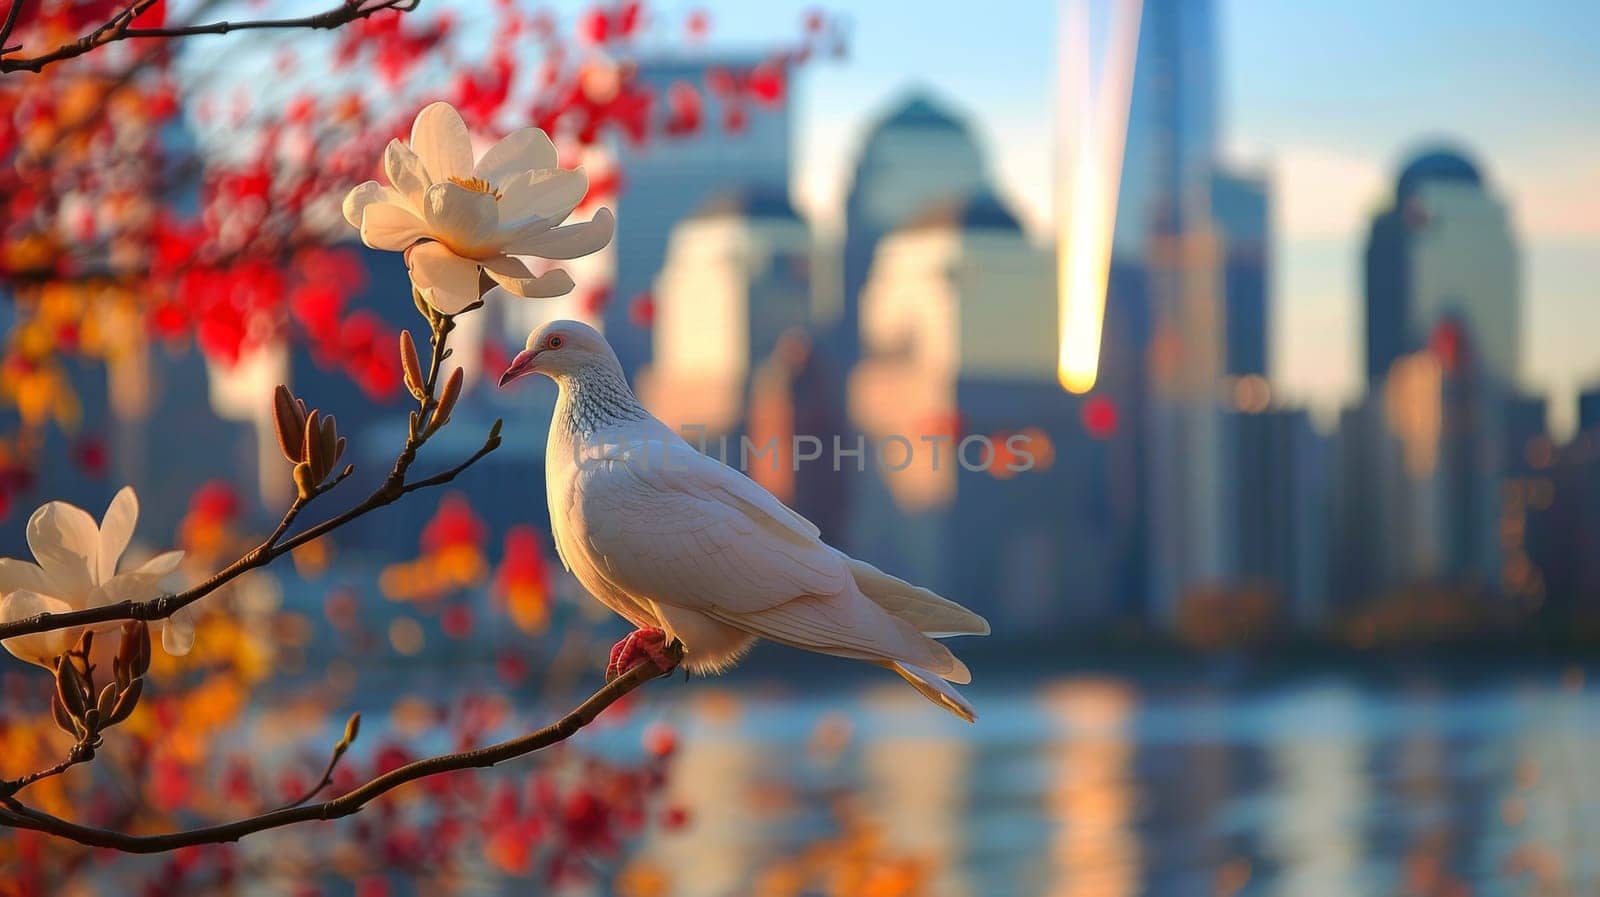 A white dove is perched on a branch of a tree in front of a city skyline. Concept of peace and tranquility, as the bird is surrounded by the hustle and bustle of the city